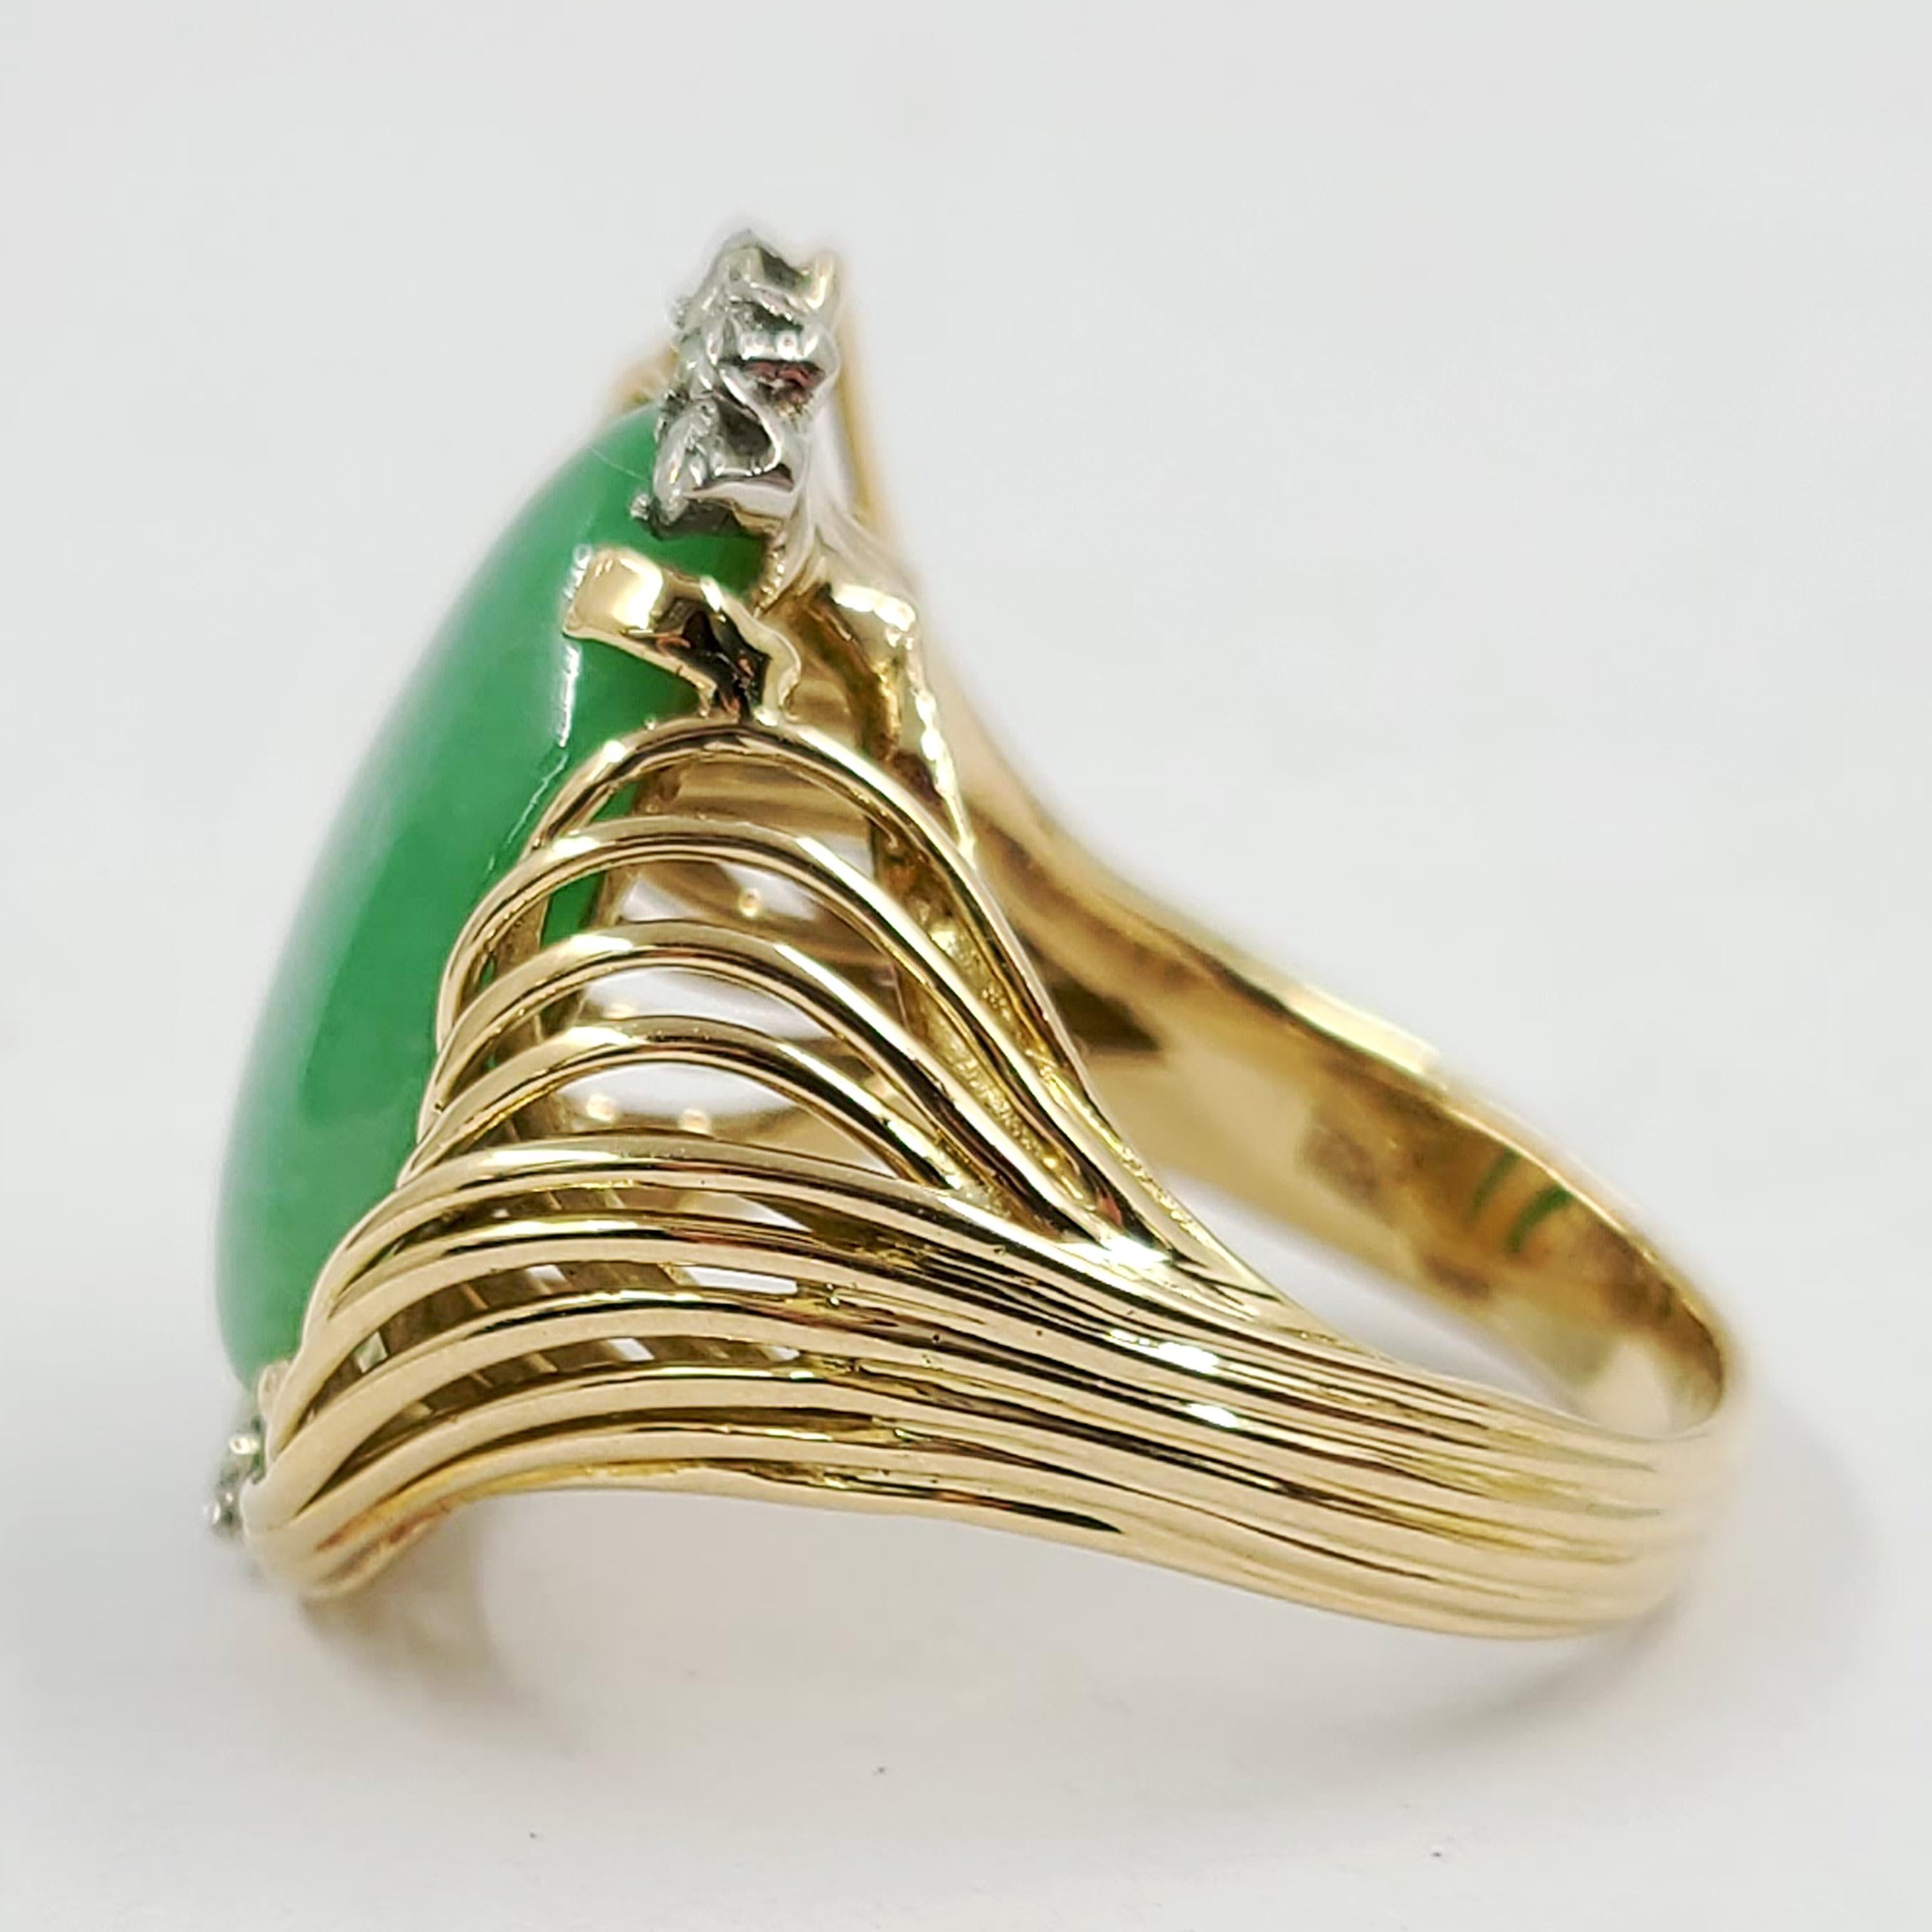 14 Karat Yellow Gold Wrapped Cocktail Ring Featuring A 19mm x 12mm Oval Jadeite Cabochon Surrounded By 7 Round Diamonds Totaling Approximately 0.15 Carats of VS Clarity & G/H Color. Current Finger Size Is 8.5; Purchase Includes One Sizing. Finished